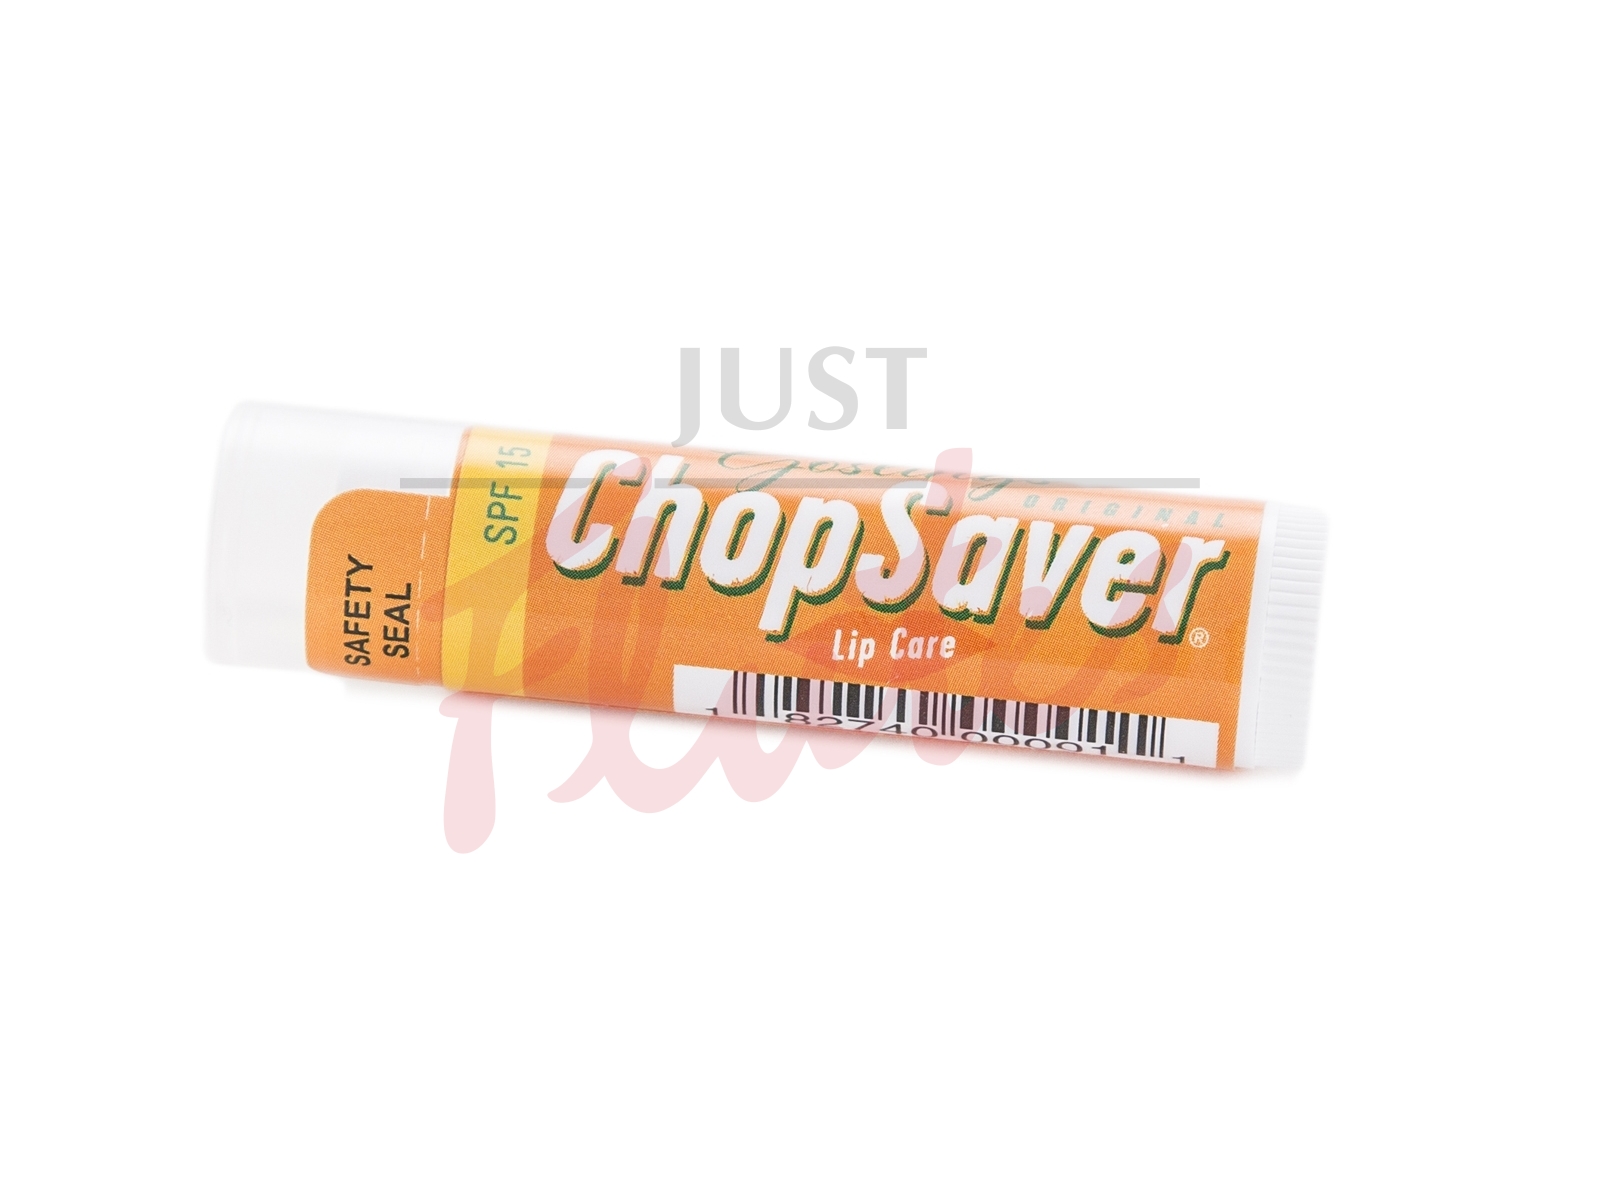 ChopSaver Gold Natural Lip Care with SPF